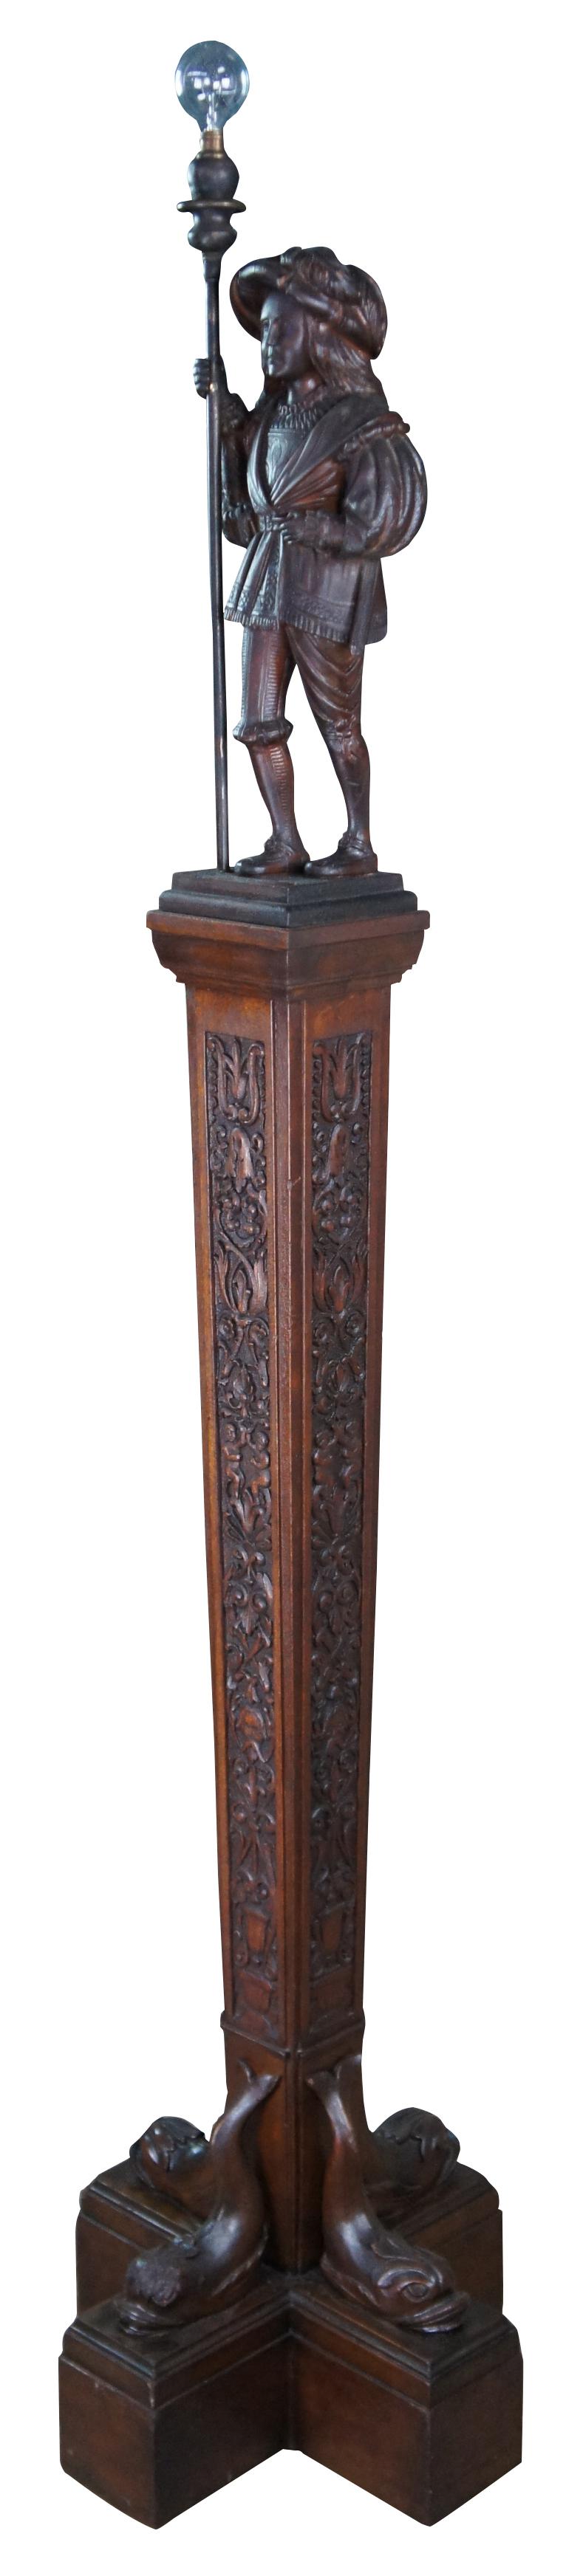 A rare and one of a kind antique figural carved oak floor lamp, circa 1920s. Meticulously carved with amazing detail throughout. Features a swiss guard with torchiere staff atop a square tapered heraldic column leading to dolphin base. Columnar